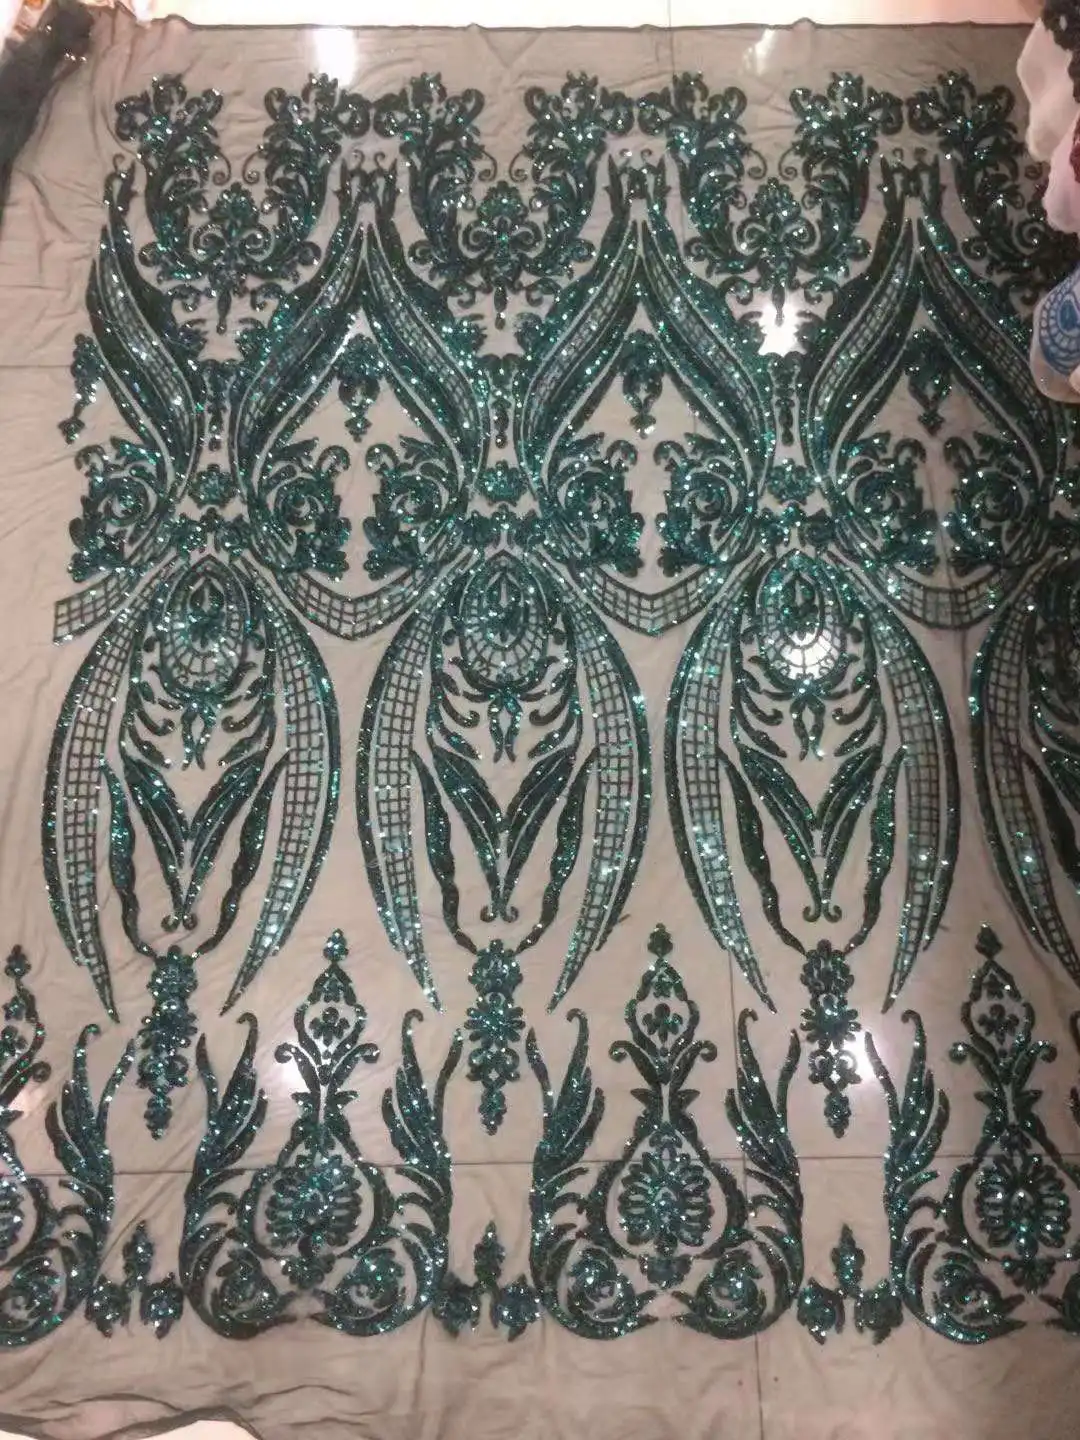 

Green London African Haute Couture Bling Sequin Embroidery Tulle Mesh Lace For Sawing Bridal Wedding Dress /Fashion Designer